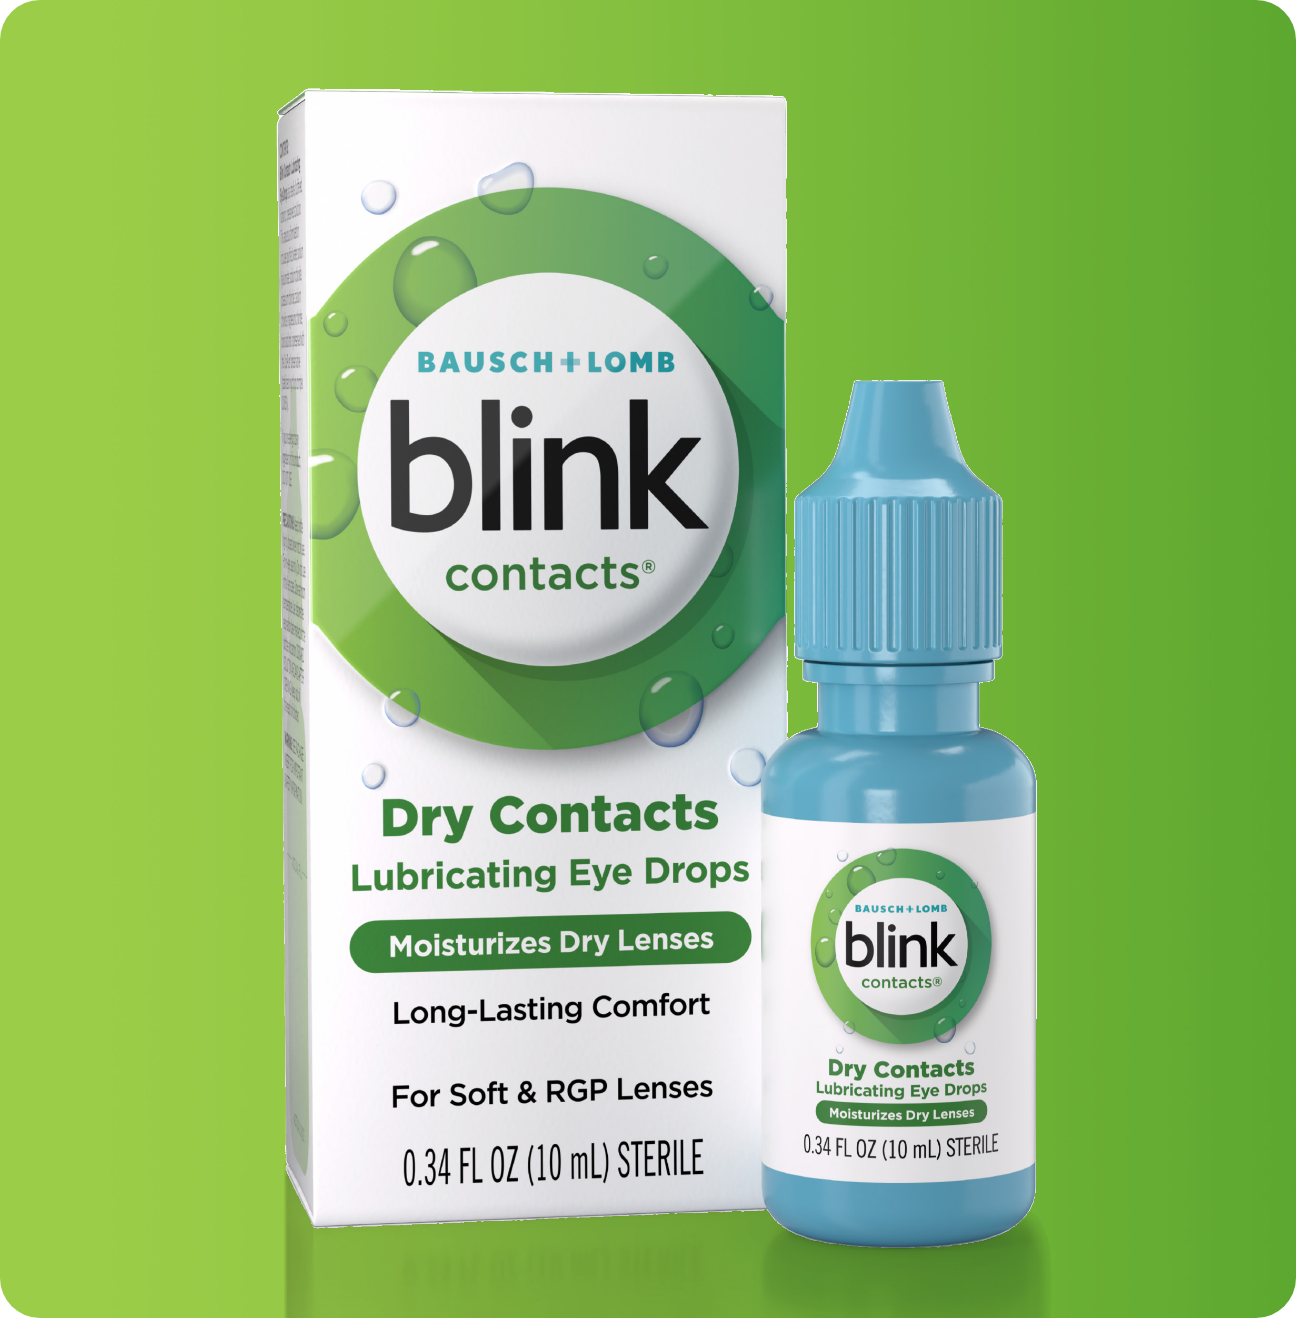 Blink Contacts Lubricating Eye Drops bottle and carton